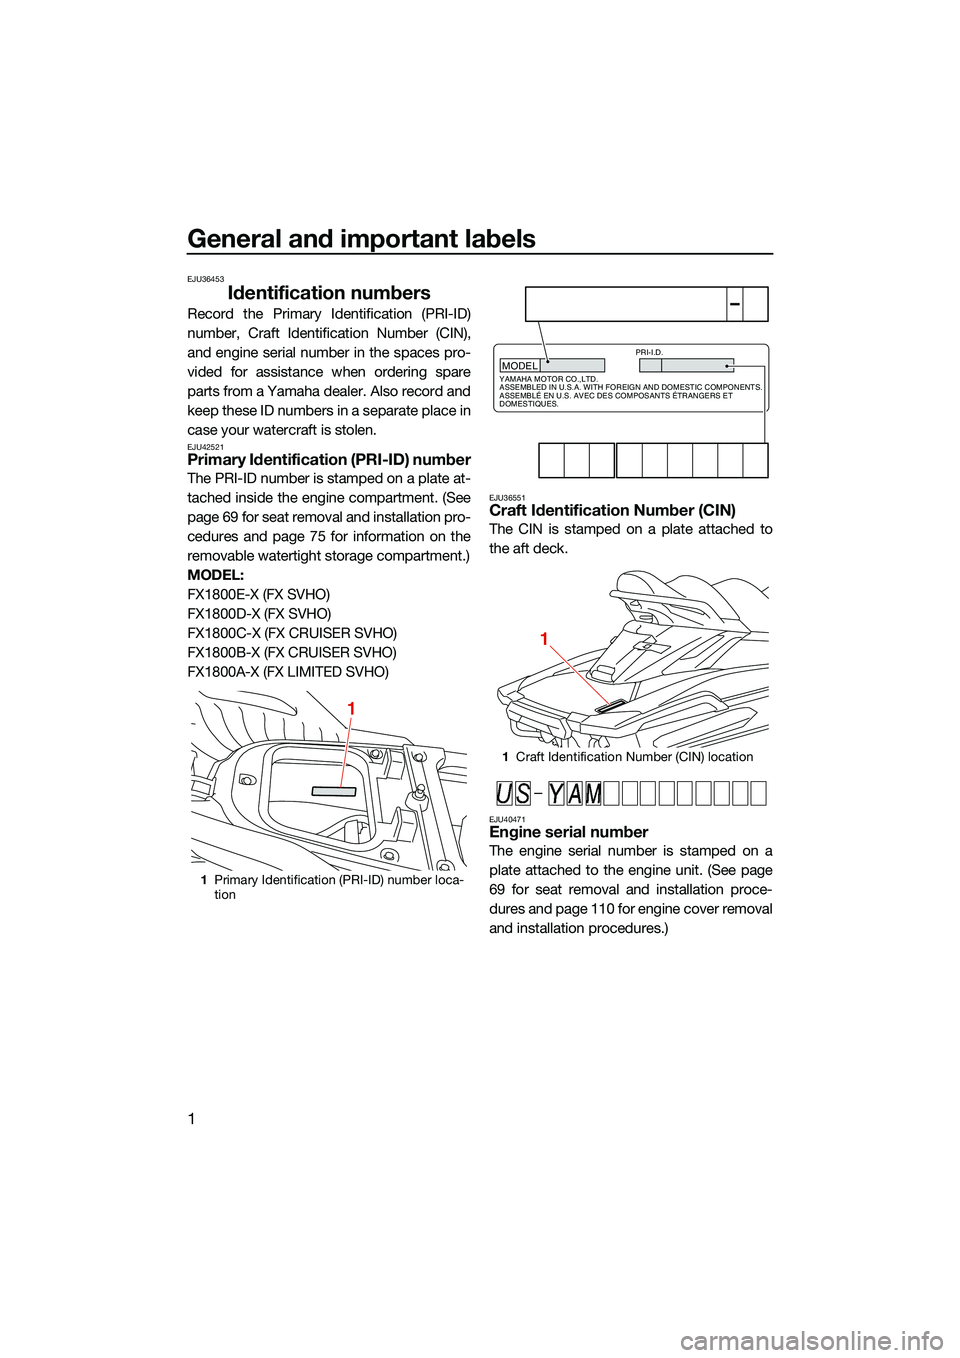 YAMAHA FX SVHO 2022  Owners Manual General and important labels
1
EJU36453
Identification numbers
Record the Primary Identification (PRI-ID)
number, Craft Identification Number (CIN),
and engine serial number in the spaces pro-
vided f